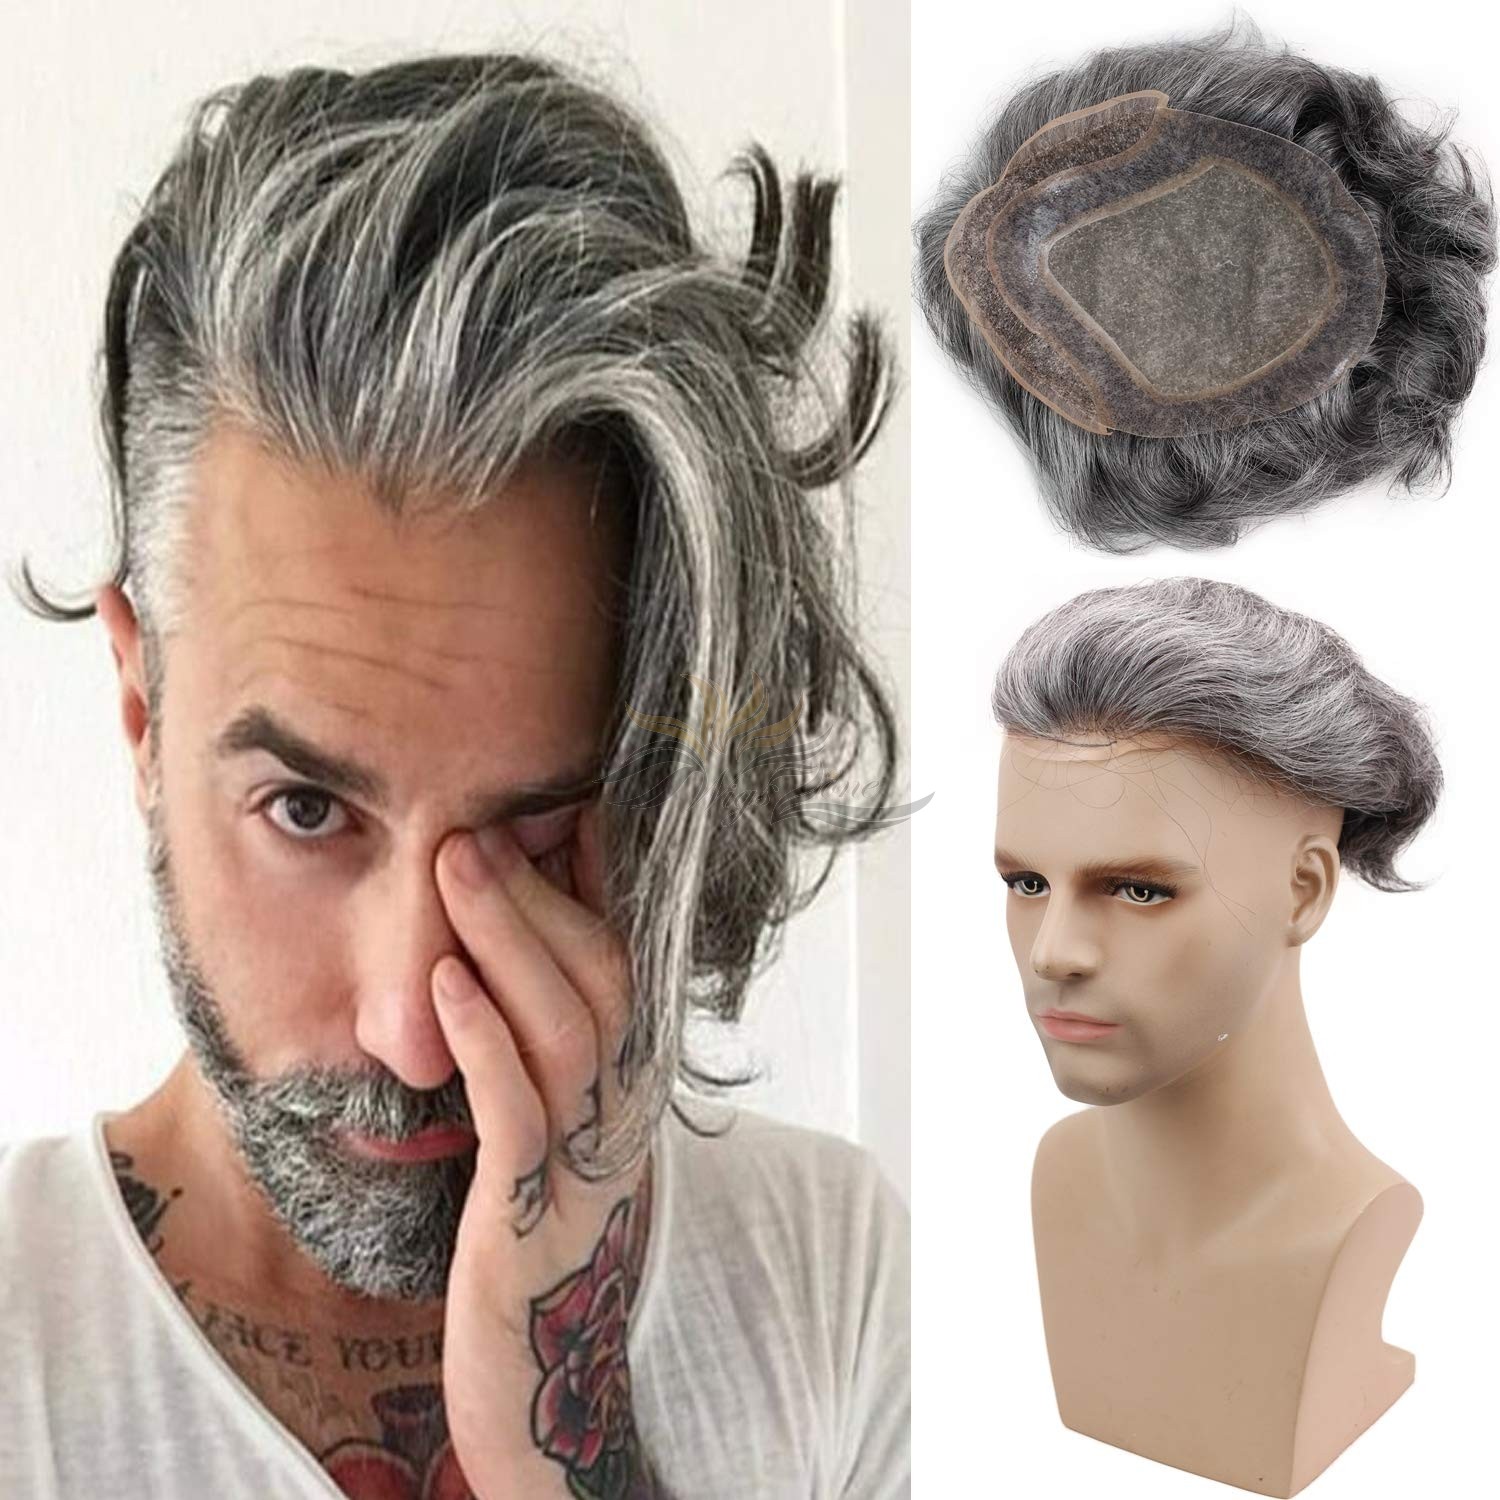 Toupee for Men Mono Lace with PU Around and the French Lace Front Men's Hair Pieces Replacement System 40% 1B Black Color Mixed 60% Grey Hair [T53]